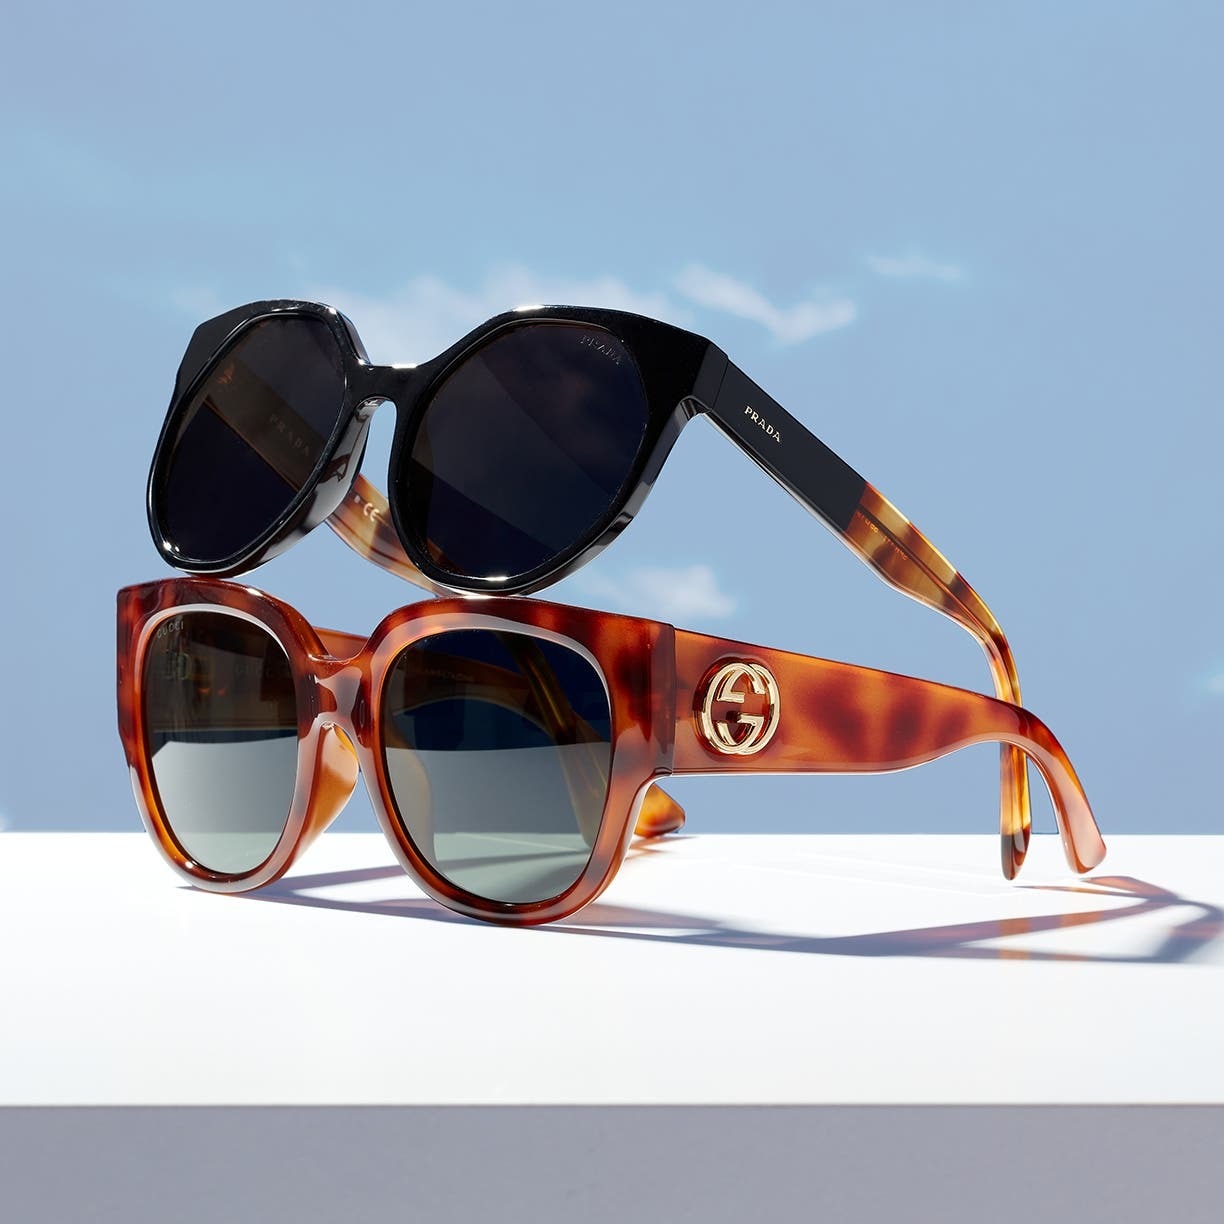 Shades of Cool: Score Designer Sunglasses at Up to 60% Off – Limited Time Offer!